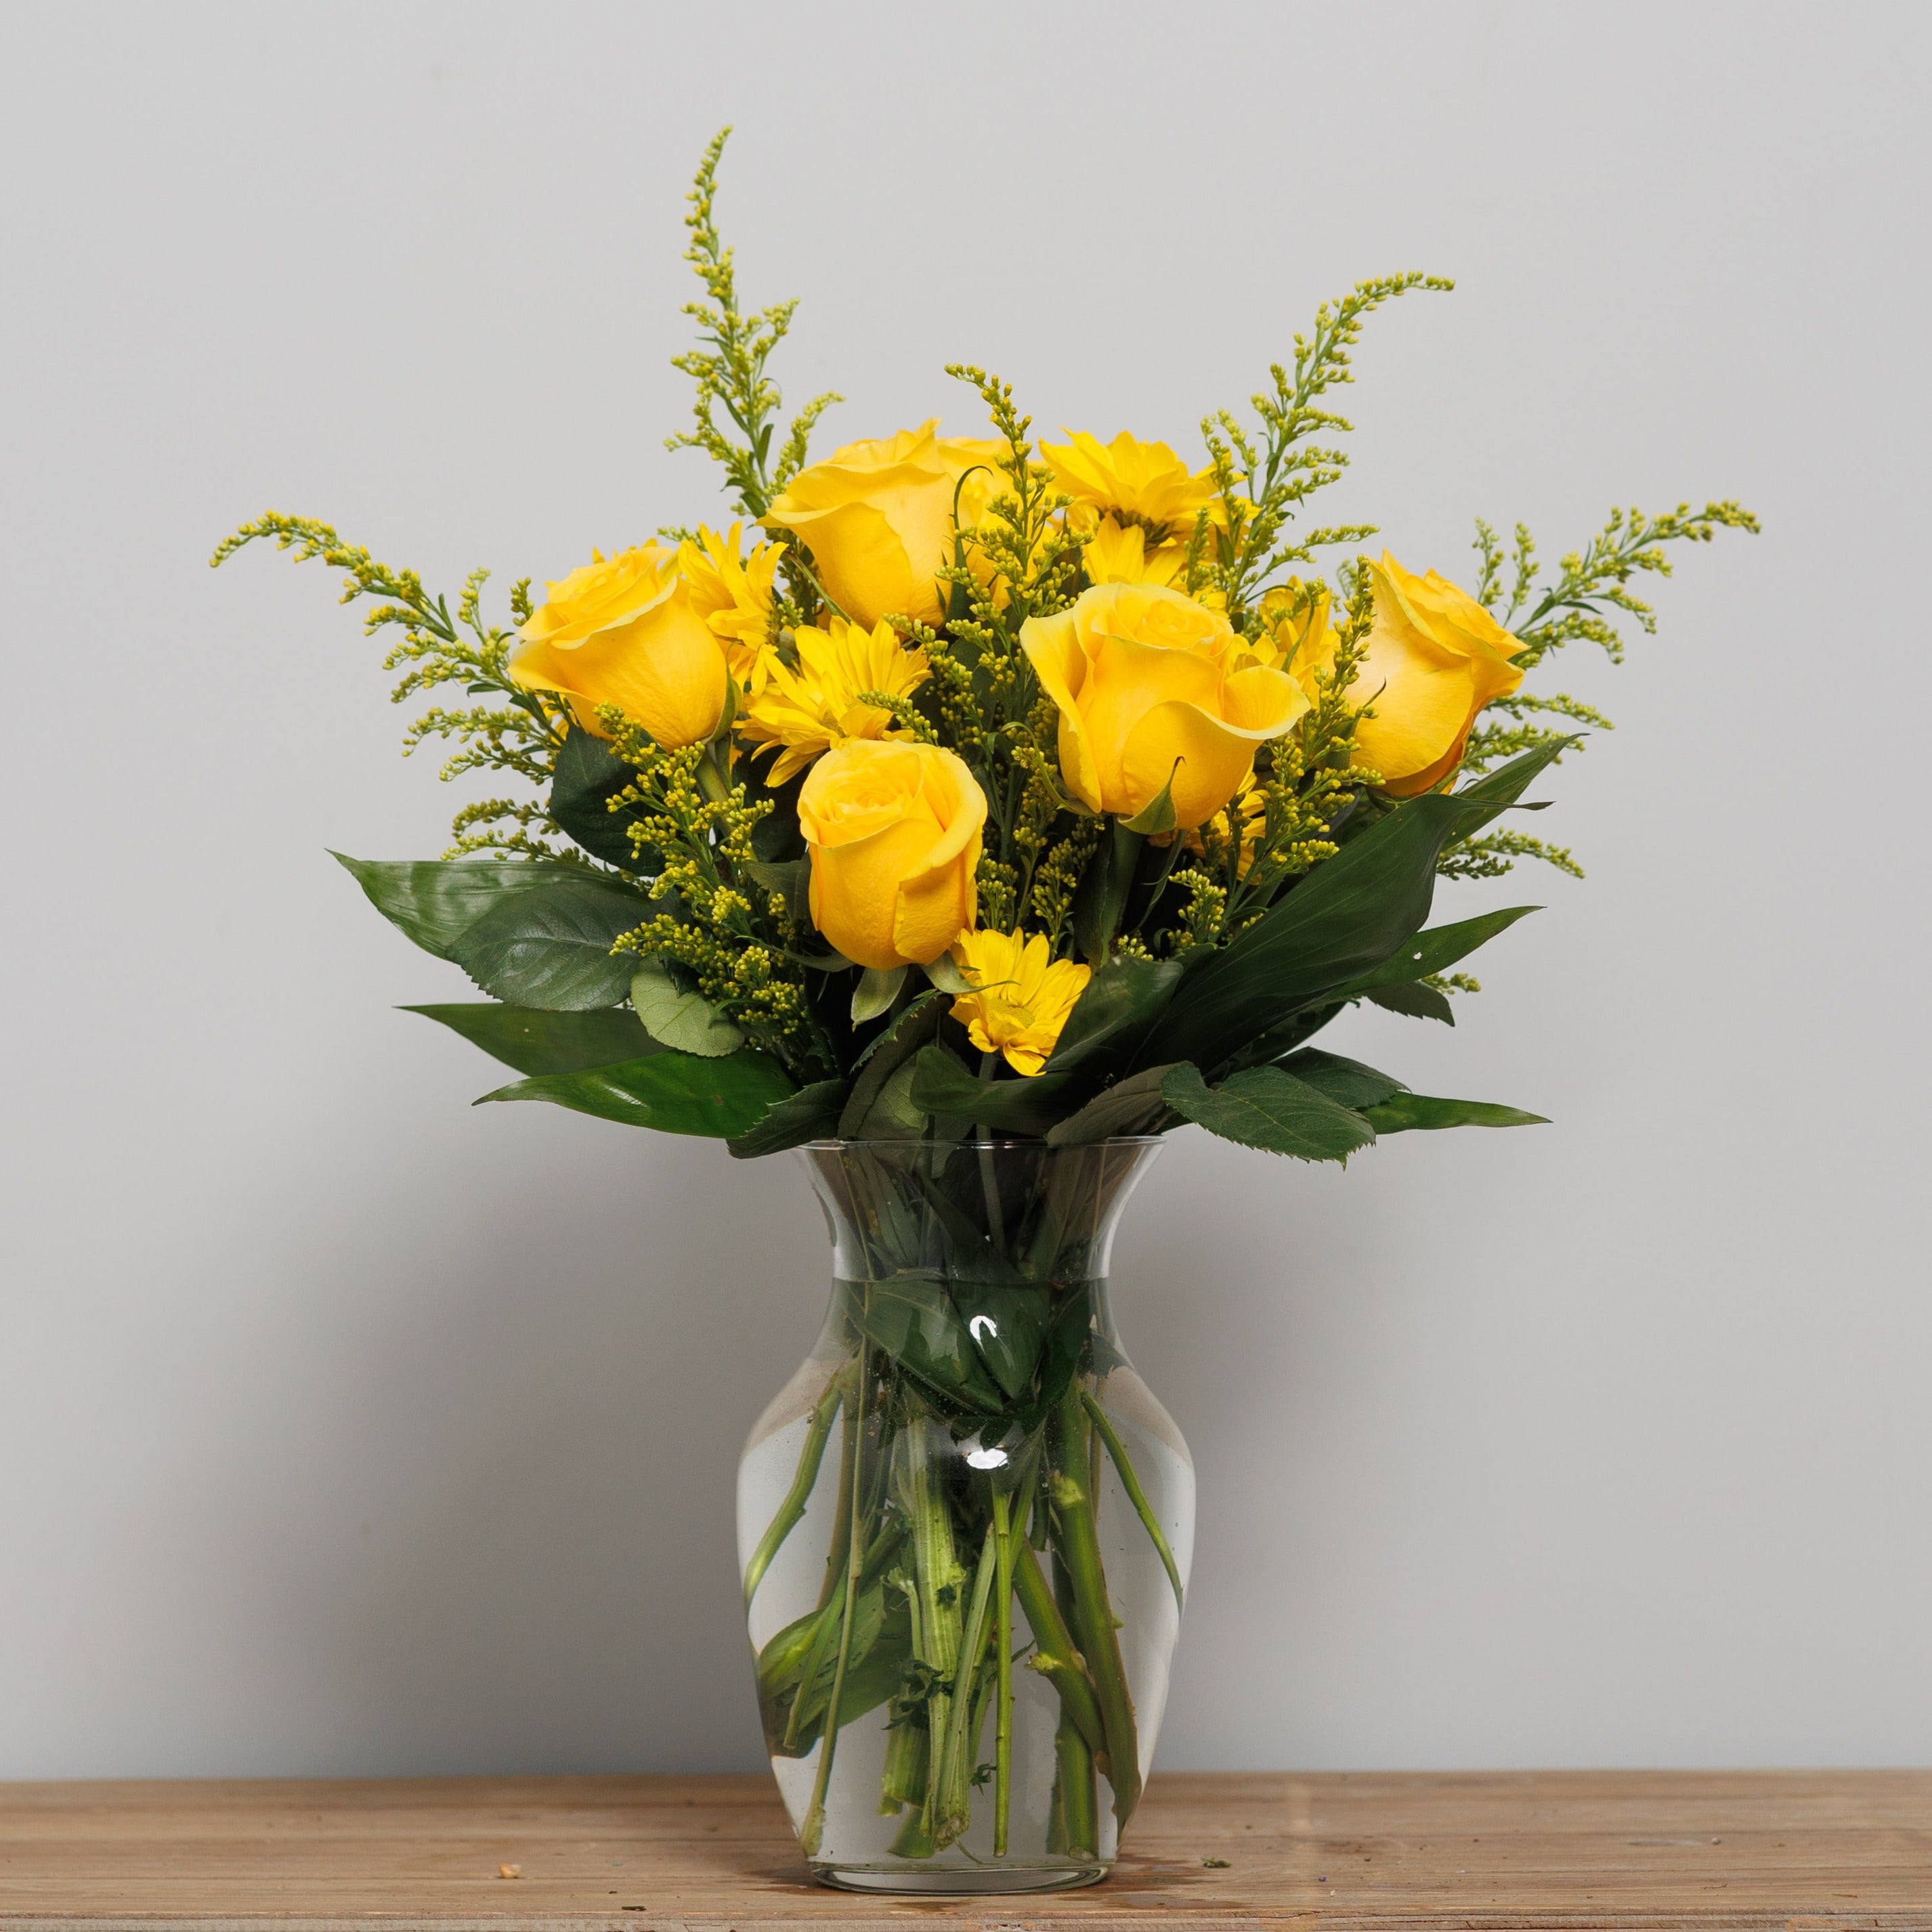 Yellow roses and yellow daisies in a vase.